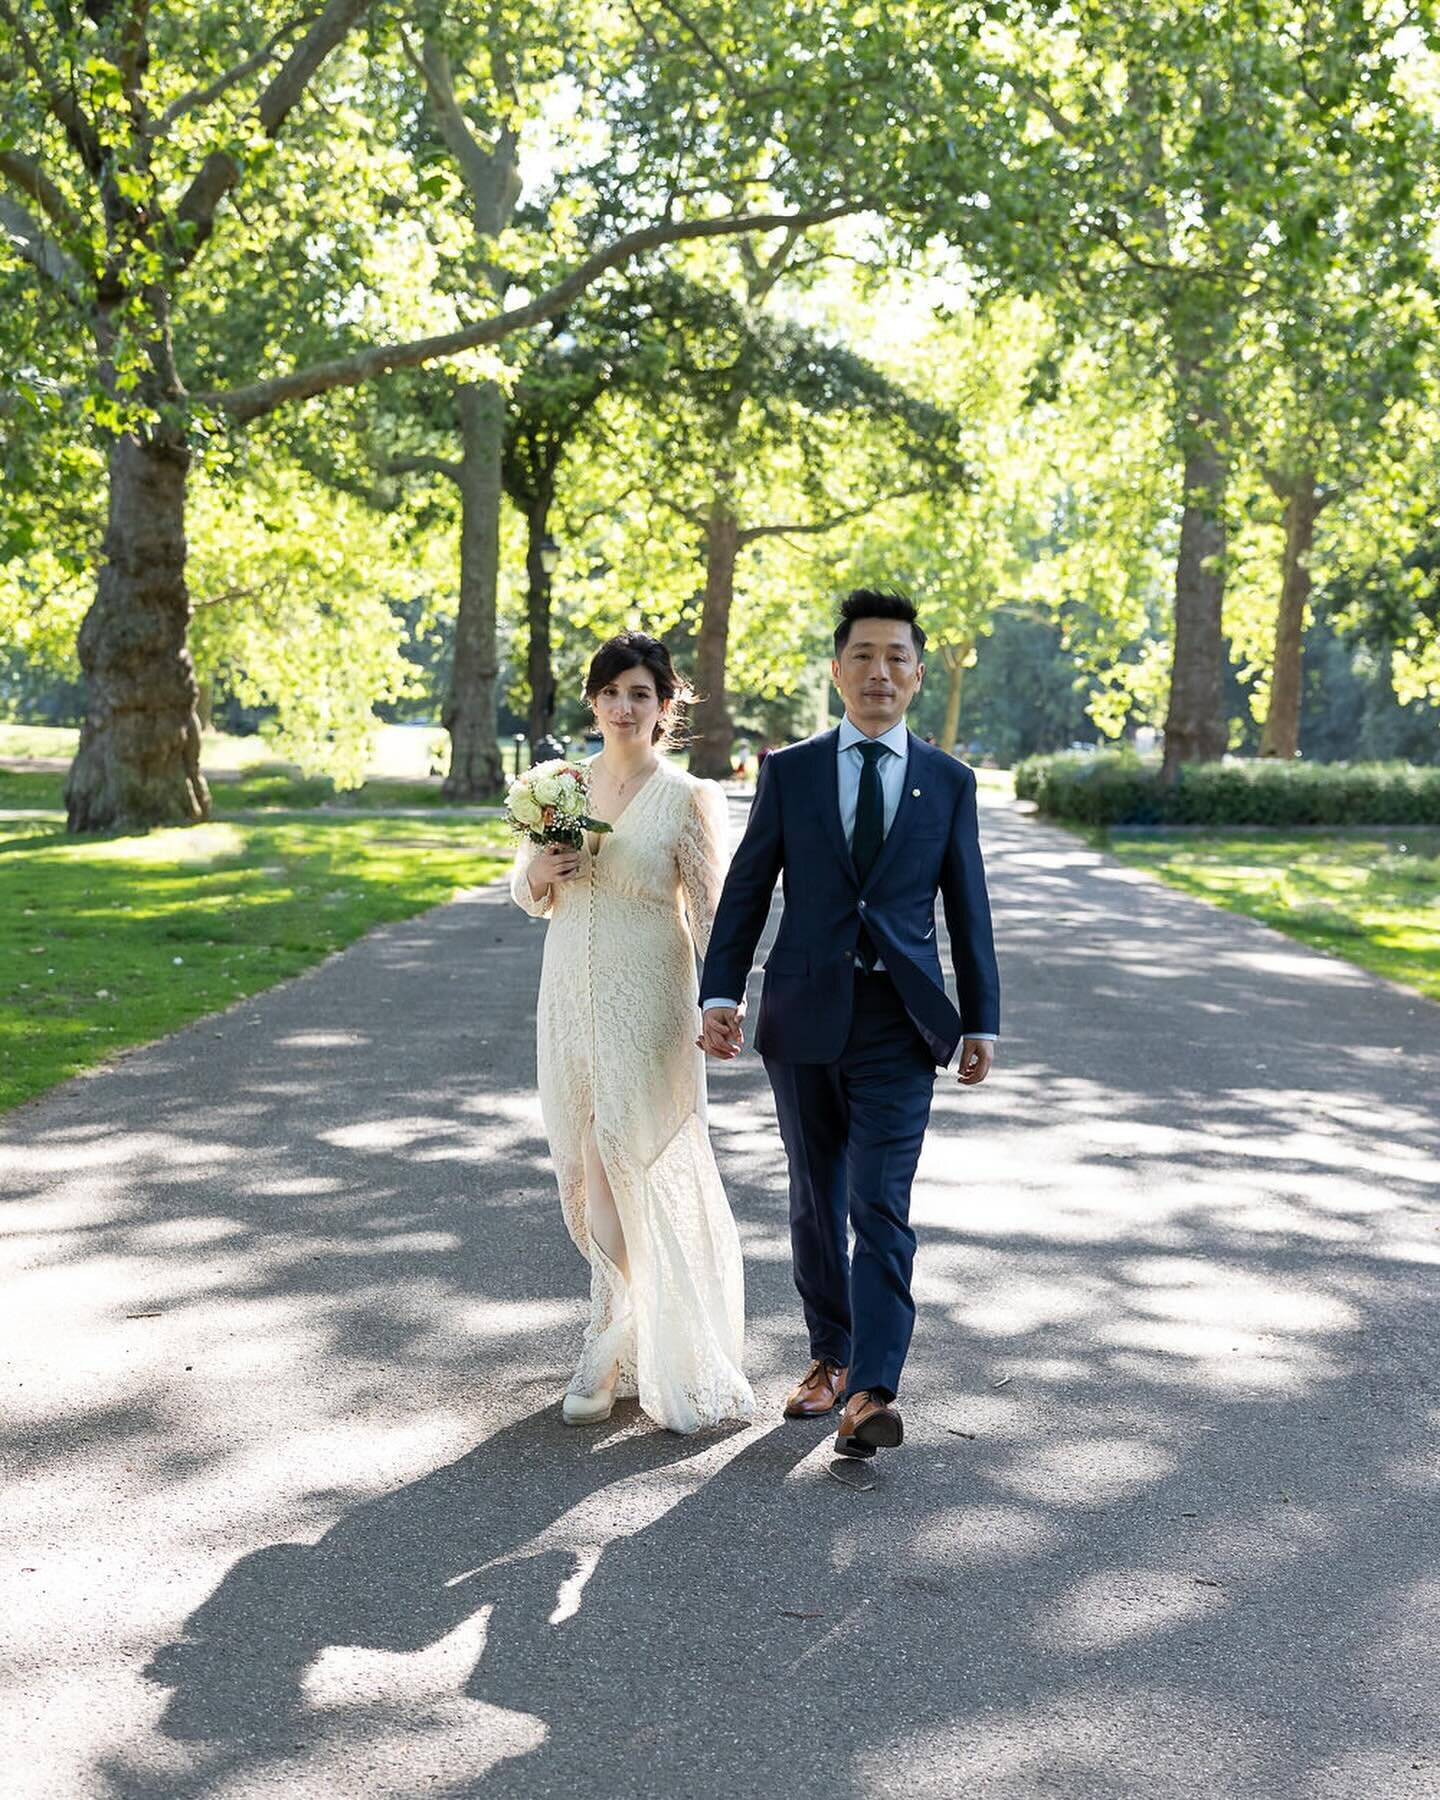 Looking forward to more summer weddings in London this year.  They are my absolute favourite and celebrate everything I love about my hometown.  Here are a few from E &amp; J&rsquo;s London wedding last July on a hot summers day.  For more from this 